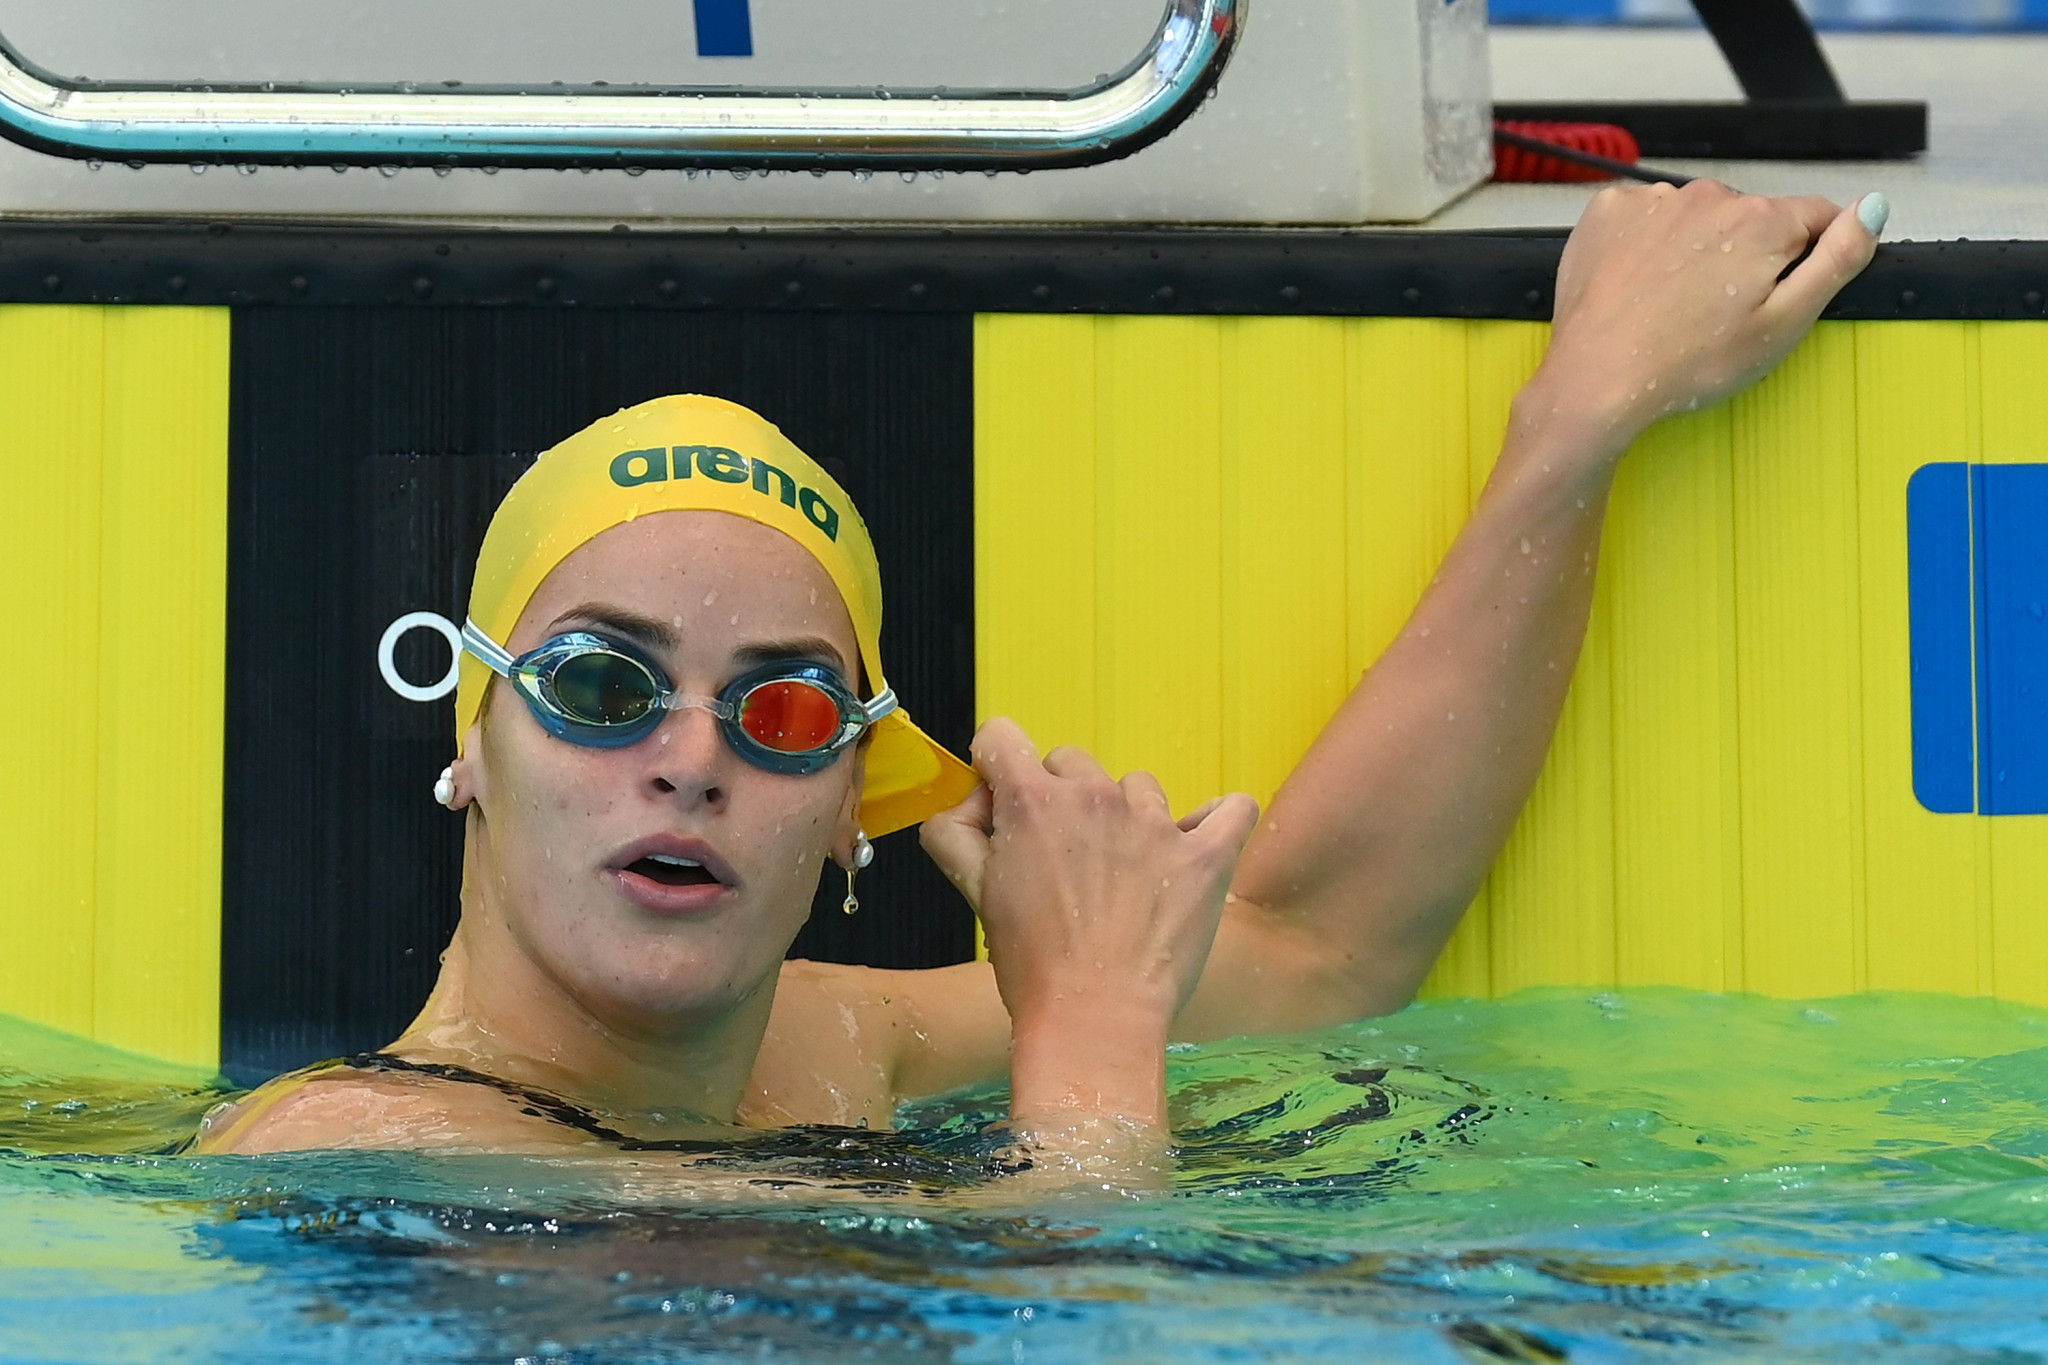 Australia's Kaylee McKeown proved too strong in the women’s 200m breaststroke final ©Getty Images